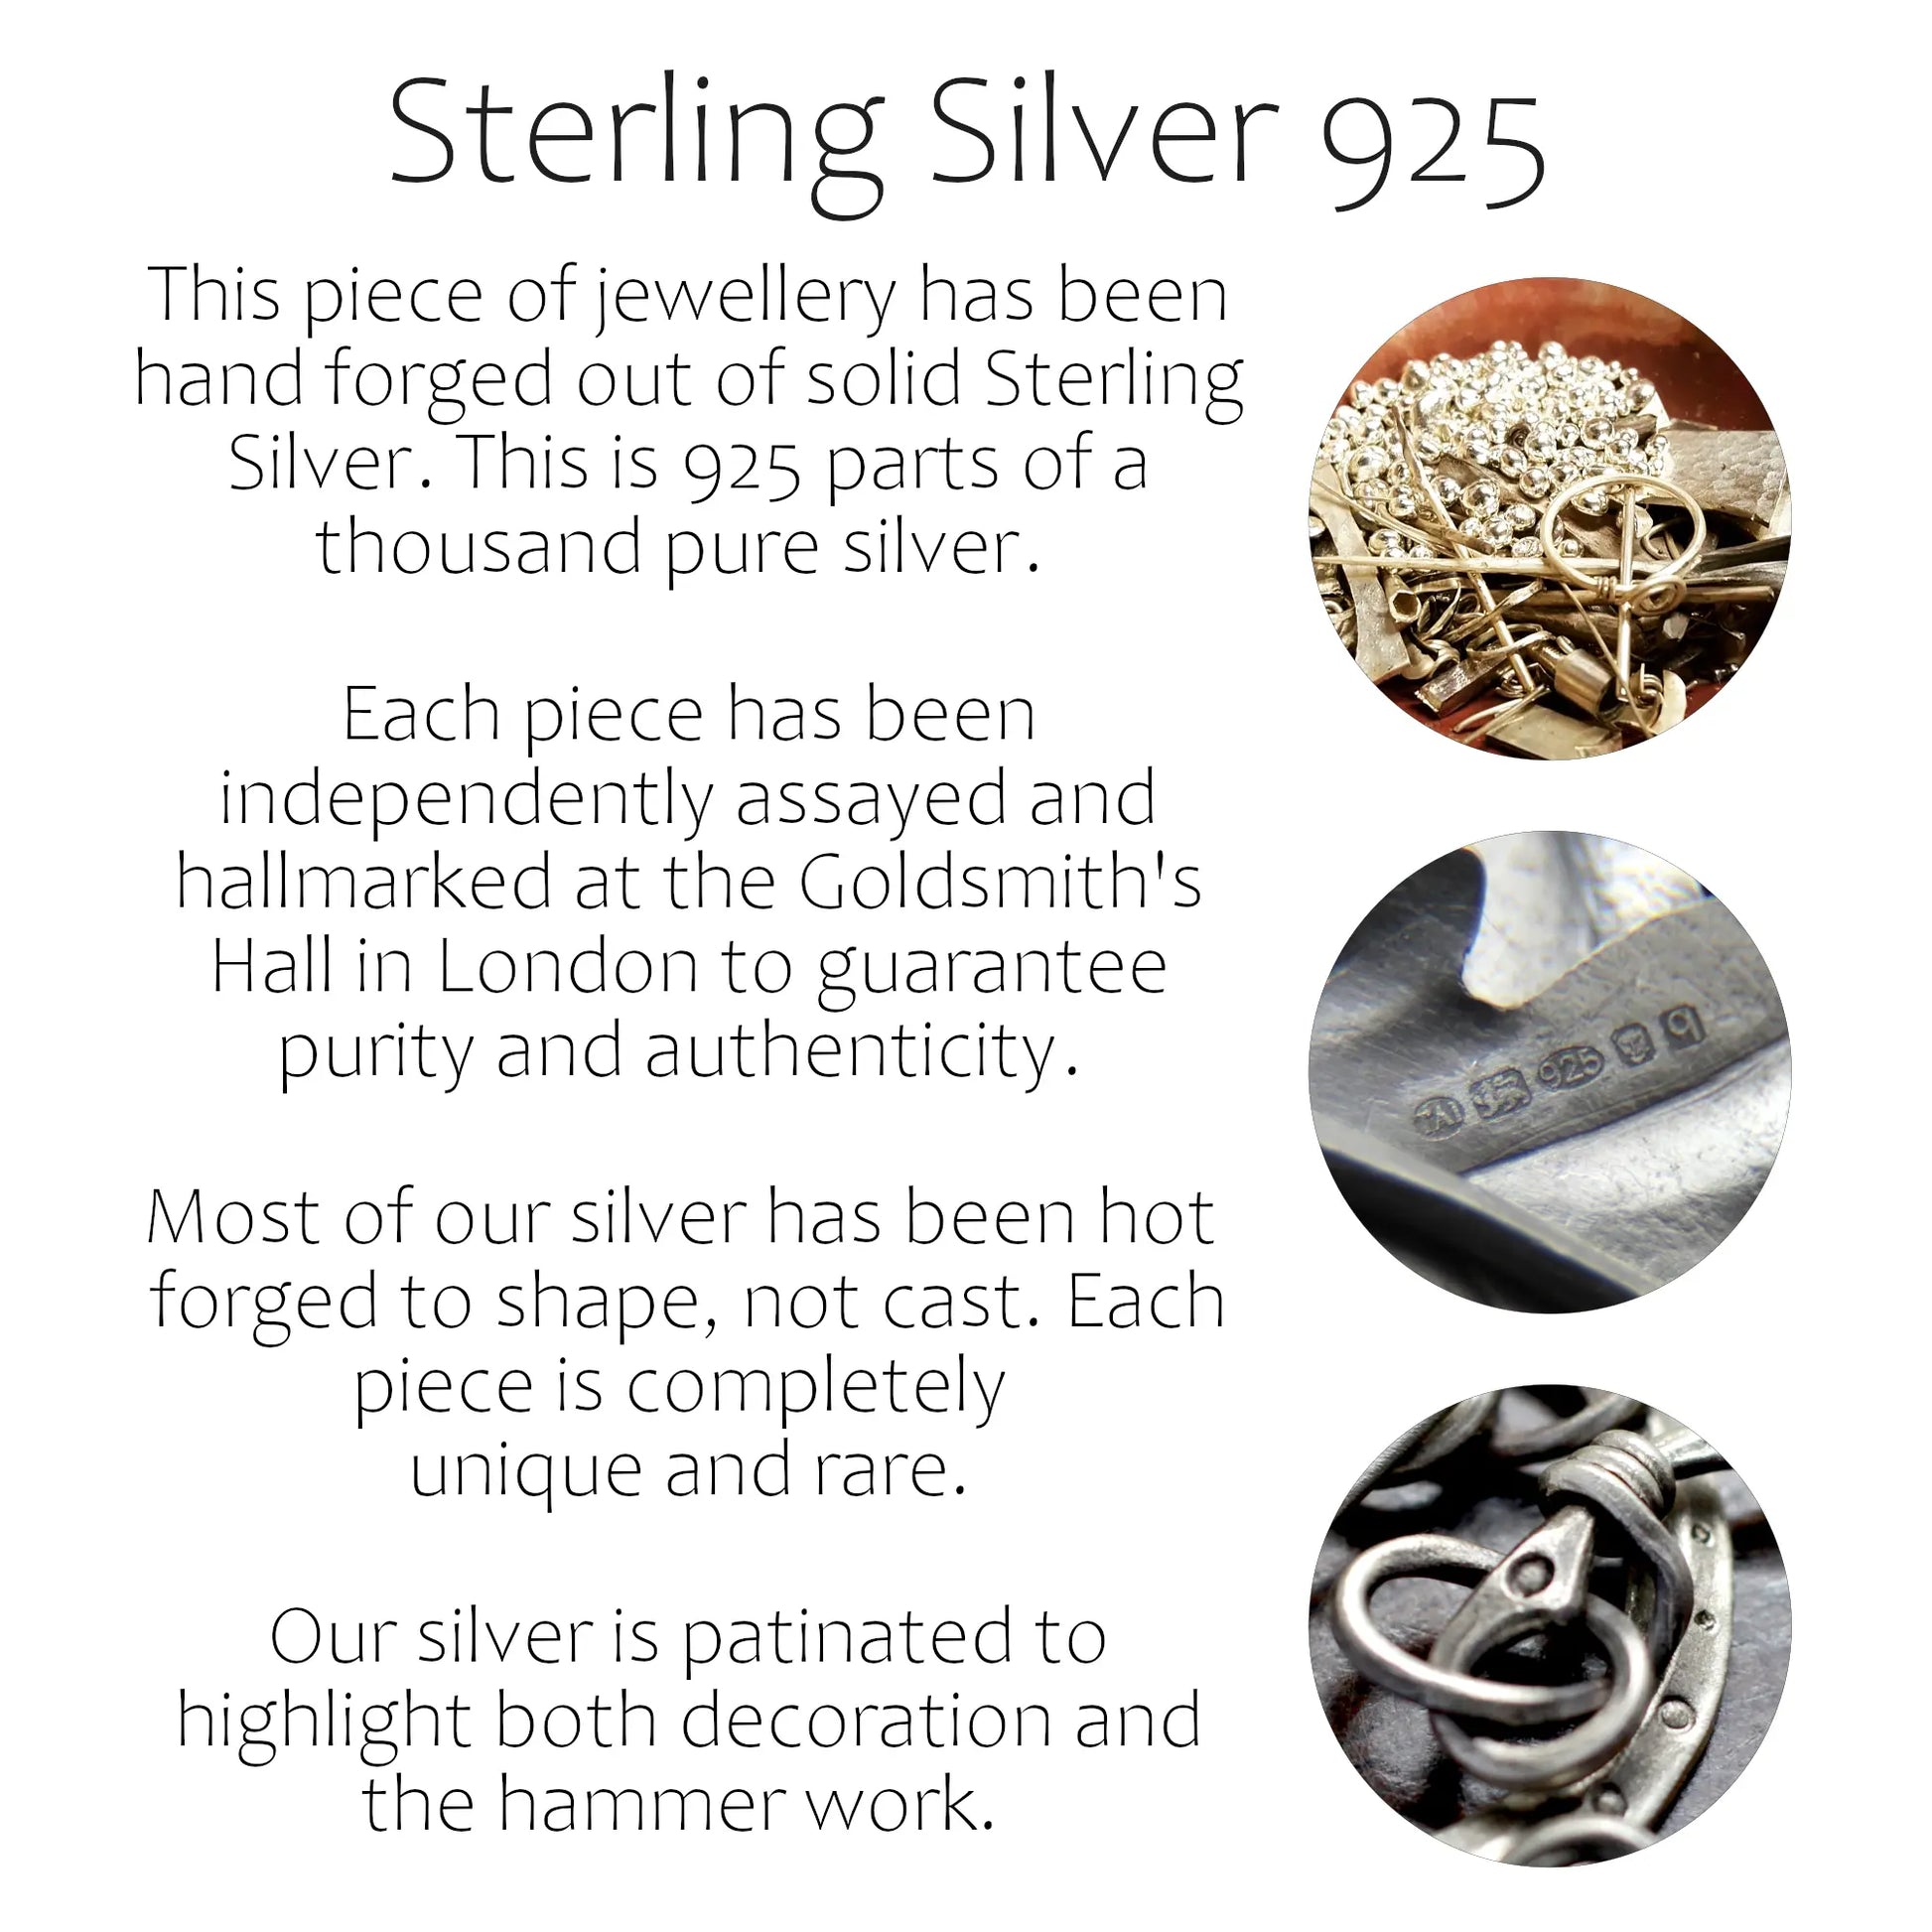 Information about material Sterling Silver 925. This piece of jewellery has been hand forged out of solid Sterling Silver. This is 925 parts of a thousand pure silver.  Each piece has been independently assayed and hallmarked at the Goldsmith's Hall in London to guarantee purity and authenticity.  Most of our silver has been hot  forged to shape, not cast. Each piece is completely  unique and rare. Our silver is patinated to highlight both decoration and the hammer work. 